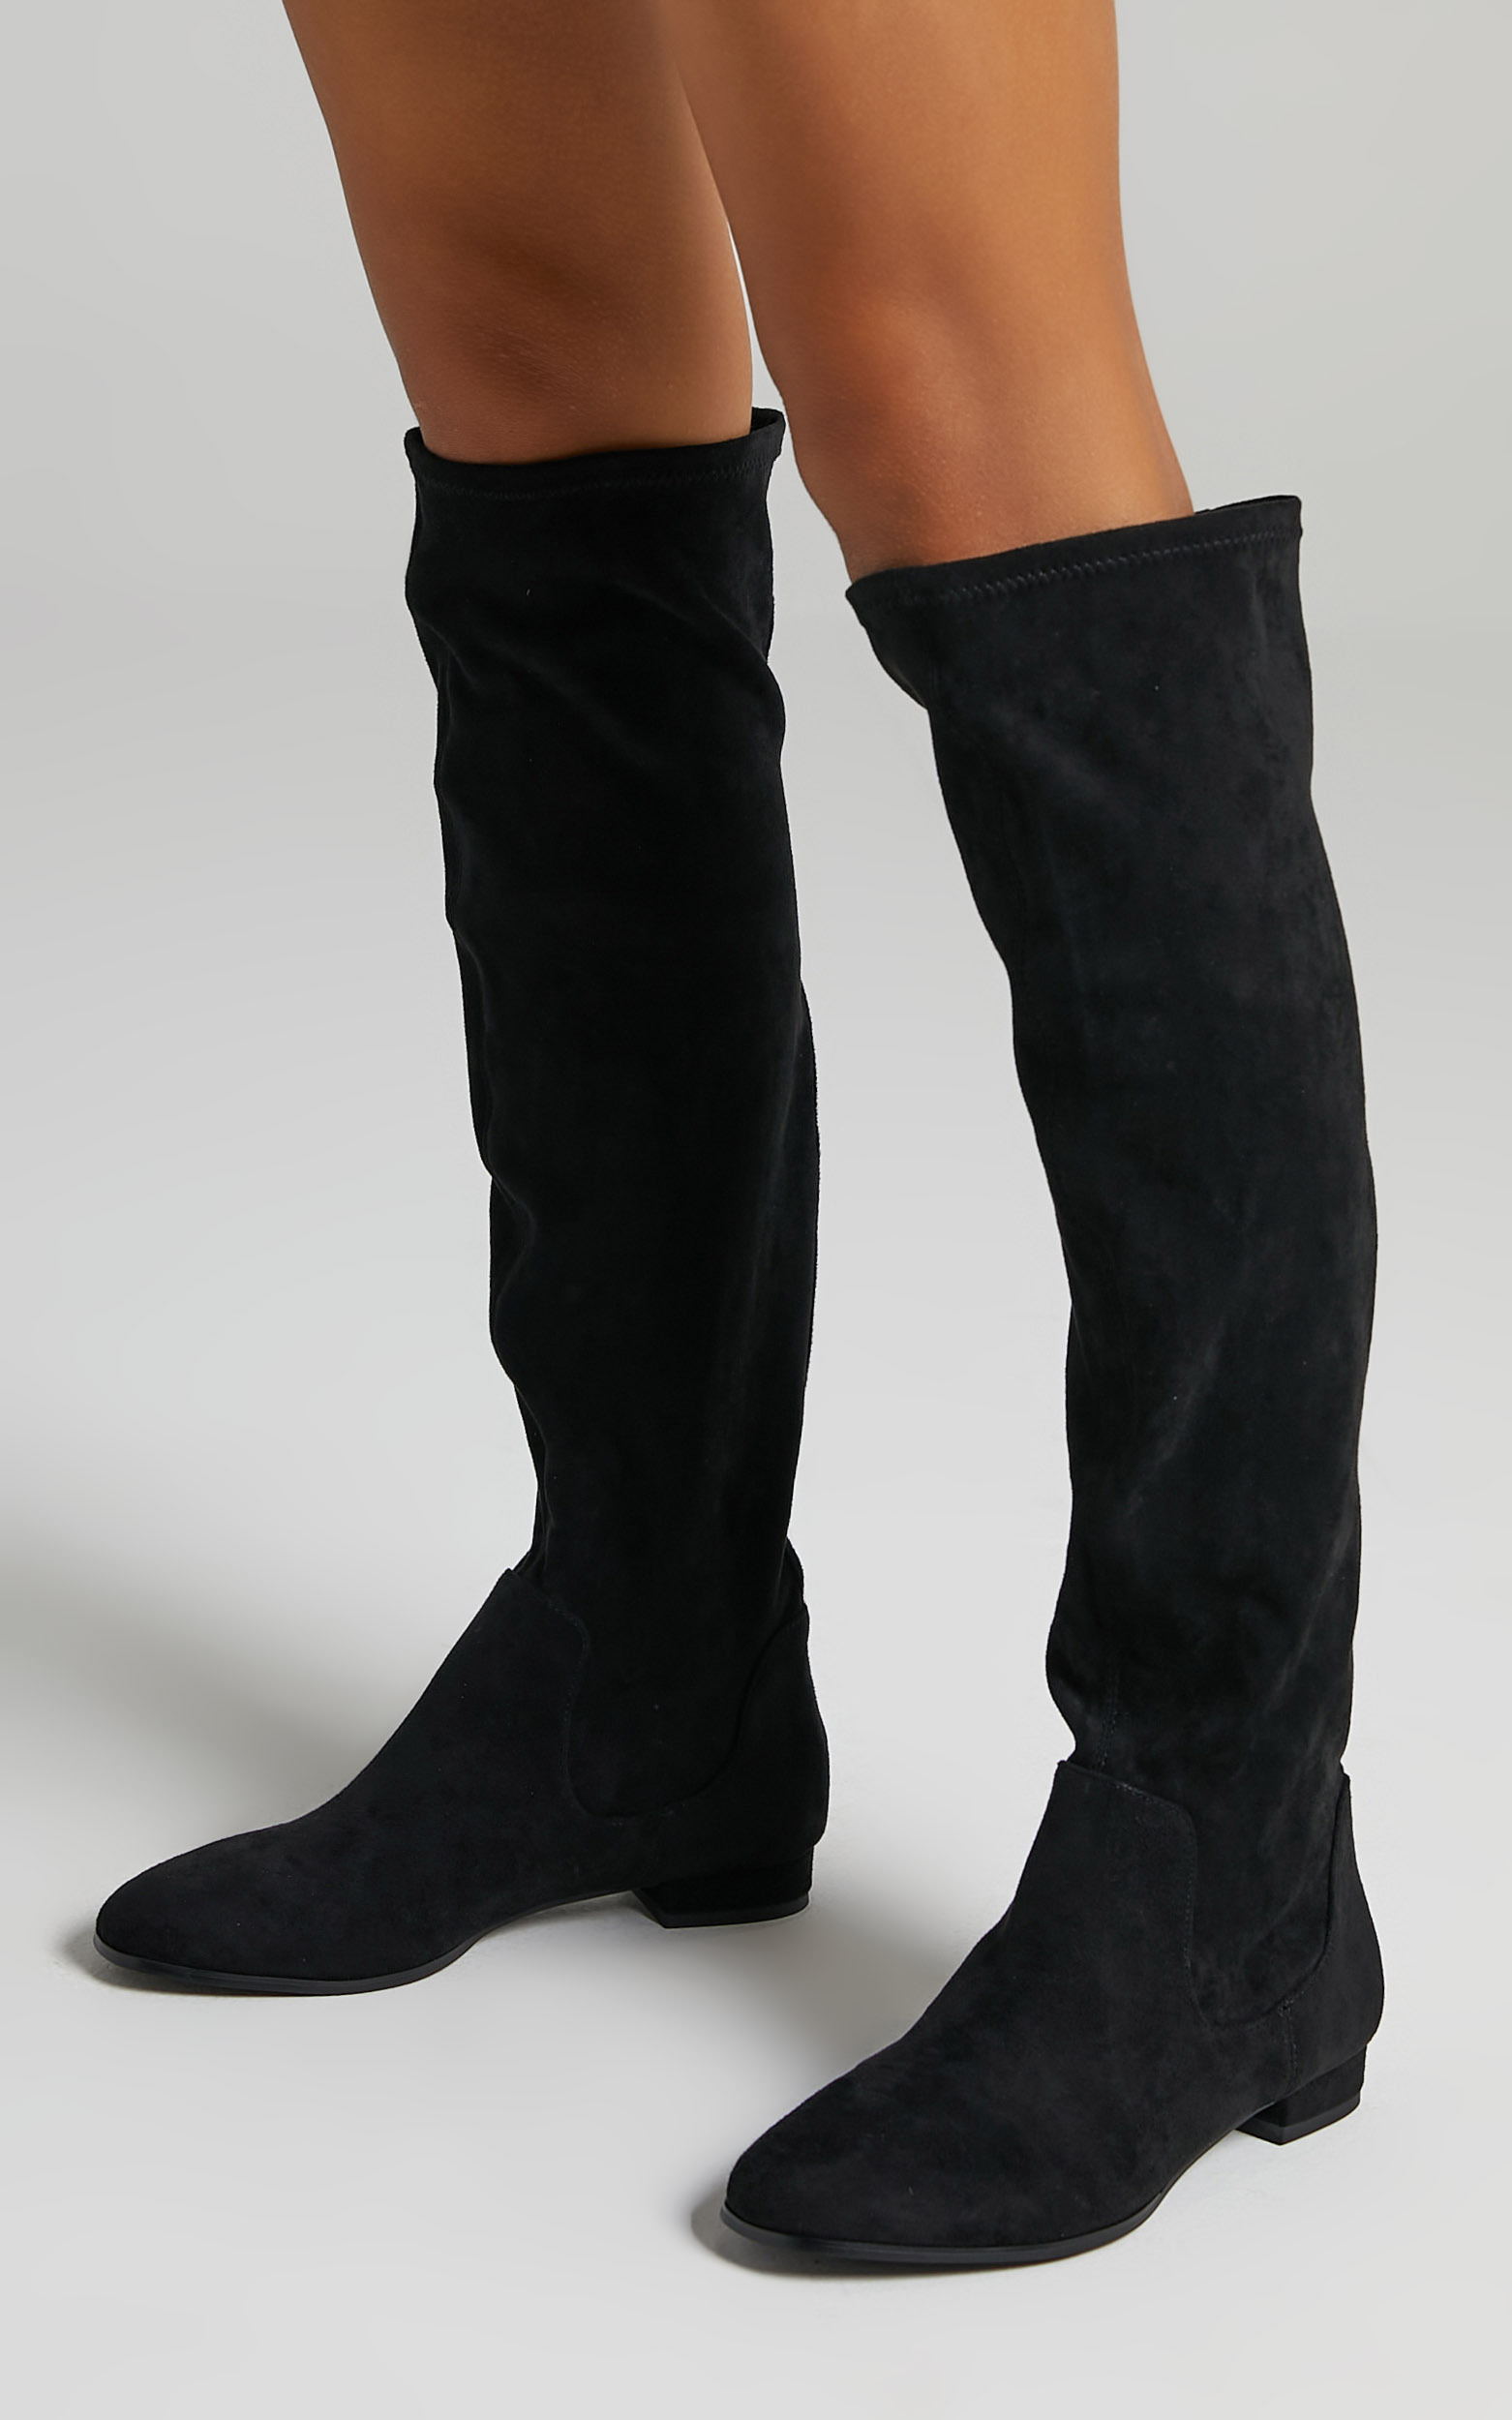 Therapy - Huxley Boots in Black - 05, BLK1, hi-res image number null